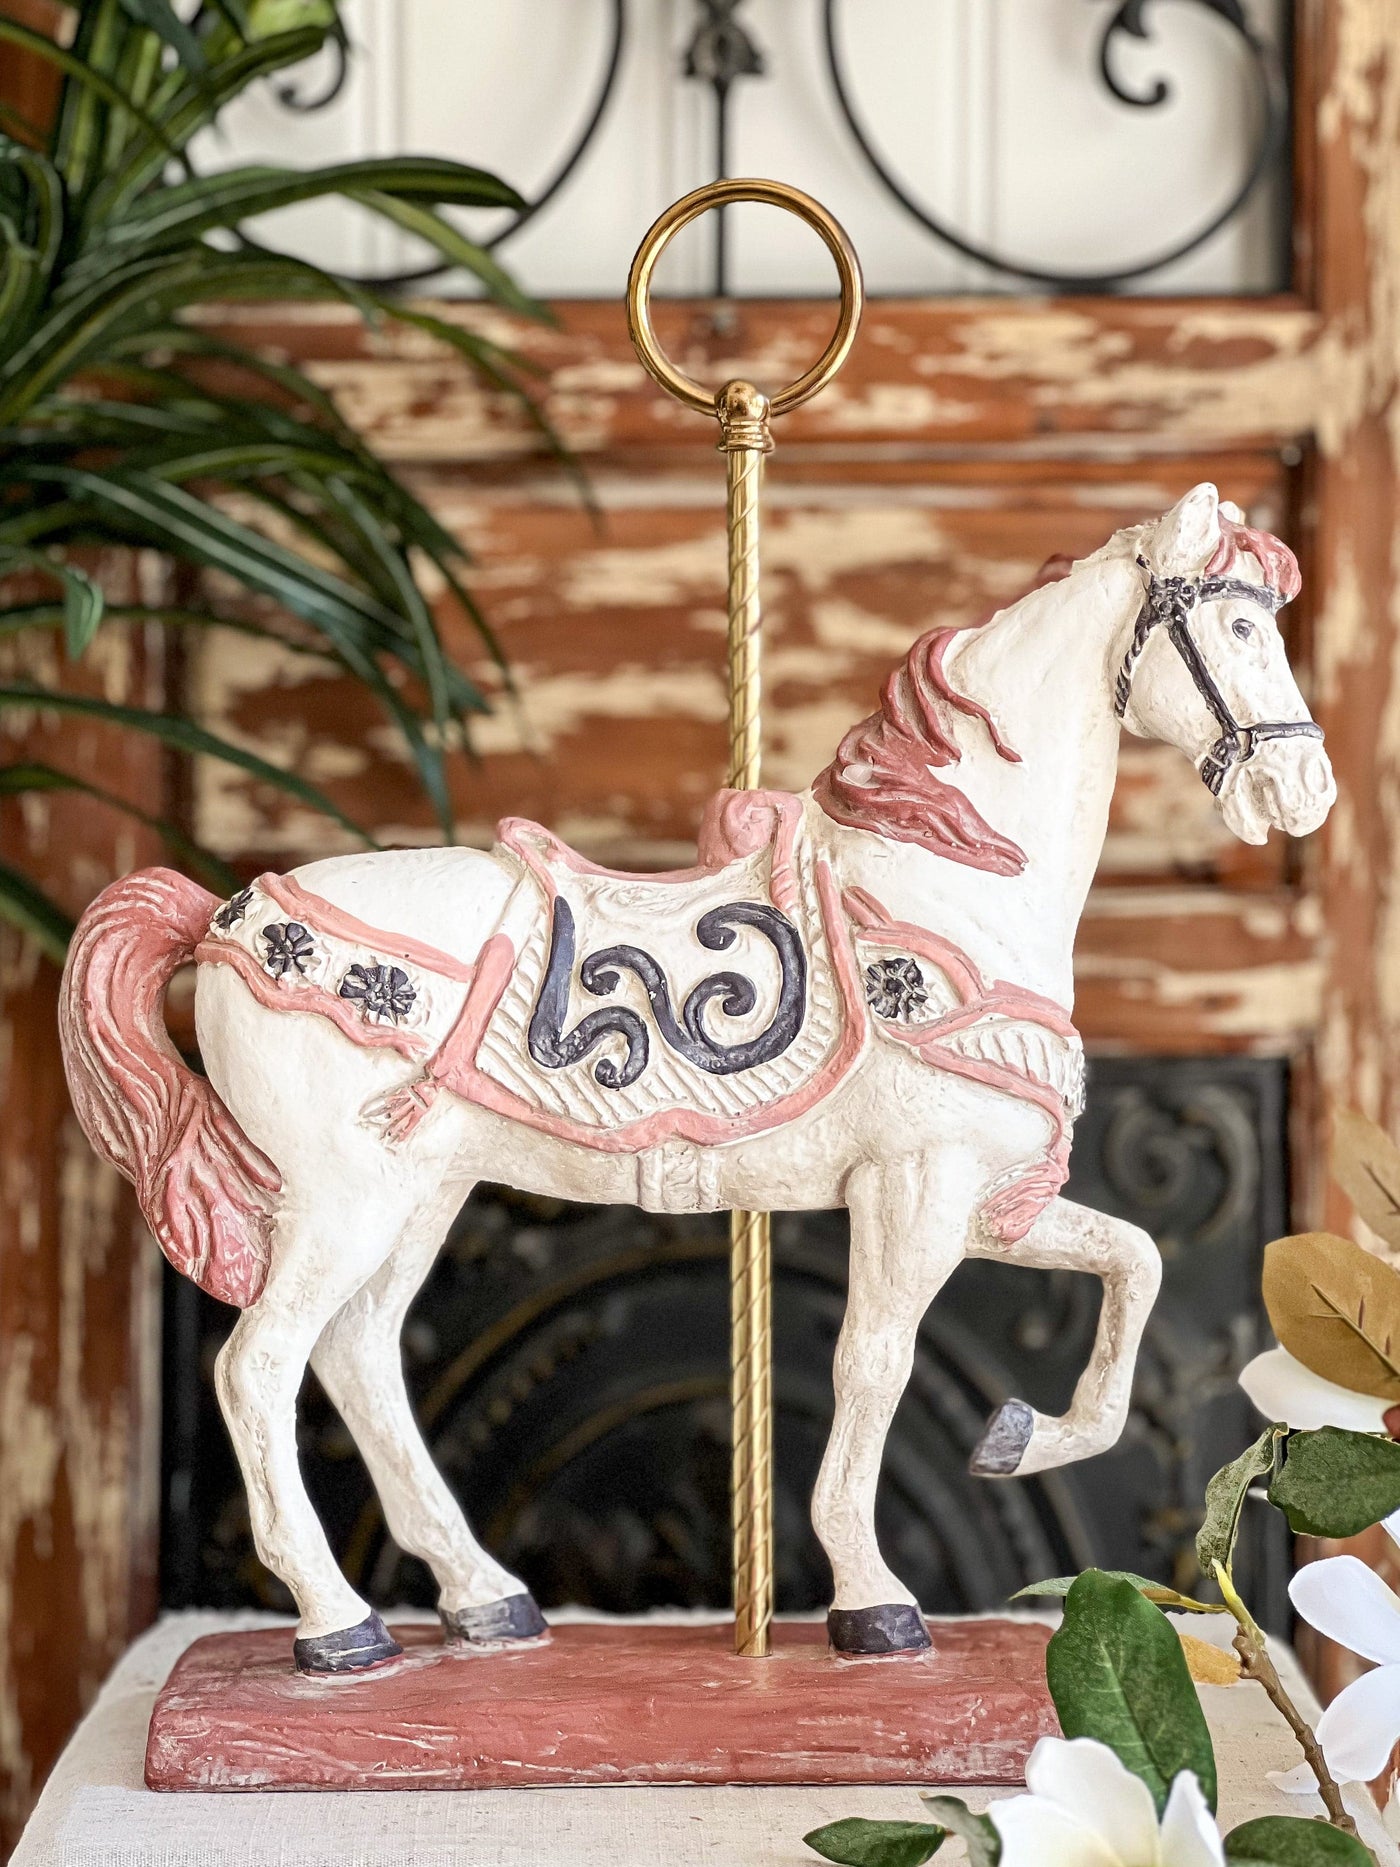 Carousel Horse Sculpture Statue by Austin Productions (1983) Revive In Style Vintage Furniture Painted Refinished Redesign Beautiful One of a Kind Artistic Antique Unique Home Decor Interior Design French Country Shabby Chic Cottage Farmhouse Grandmillenial Coastal Chalk Paint Metallic Glam Eclectic Quality Dovetailed Rustic Furniture Painter Pinterest Bedroom Living Room Entryway Kitchen Home Trends House Styles Decorating ideas